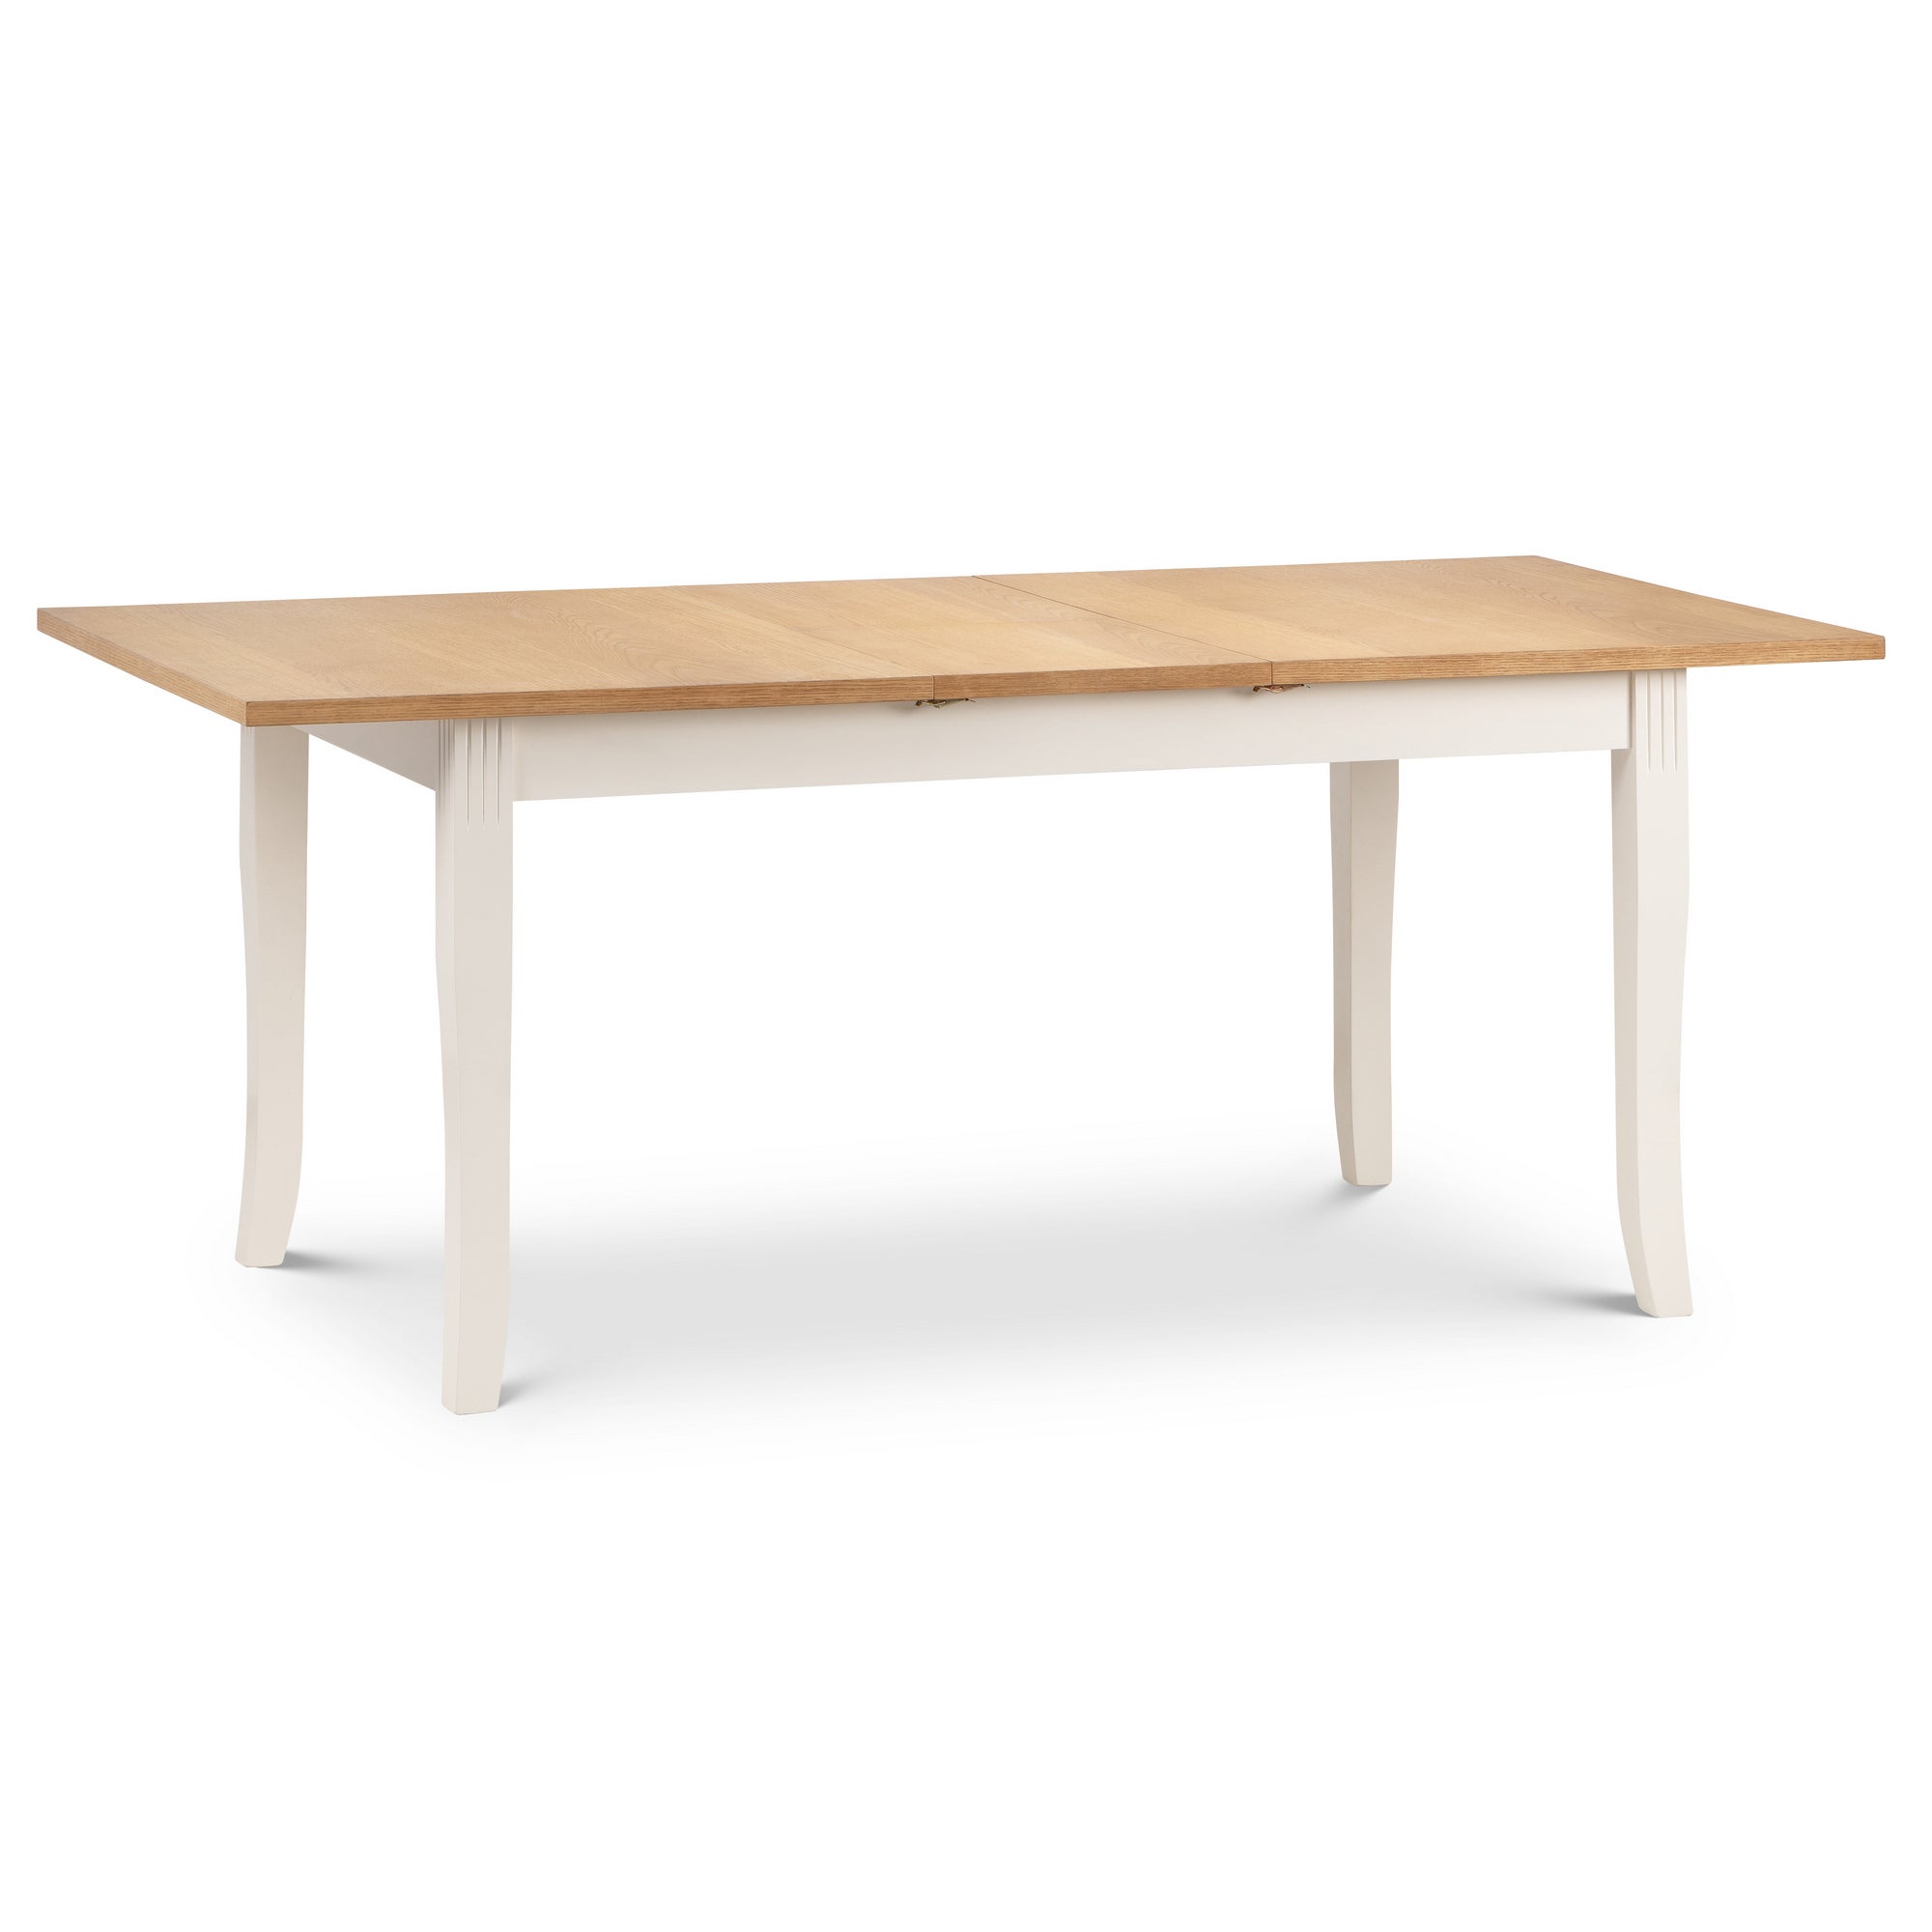 Davenport Extending Dining Table Cream and Brown